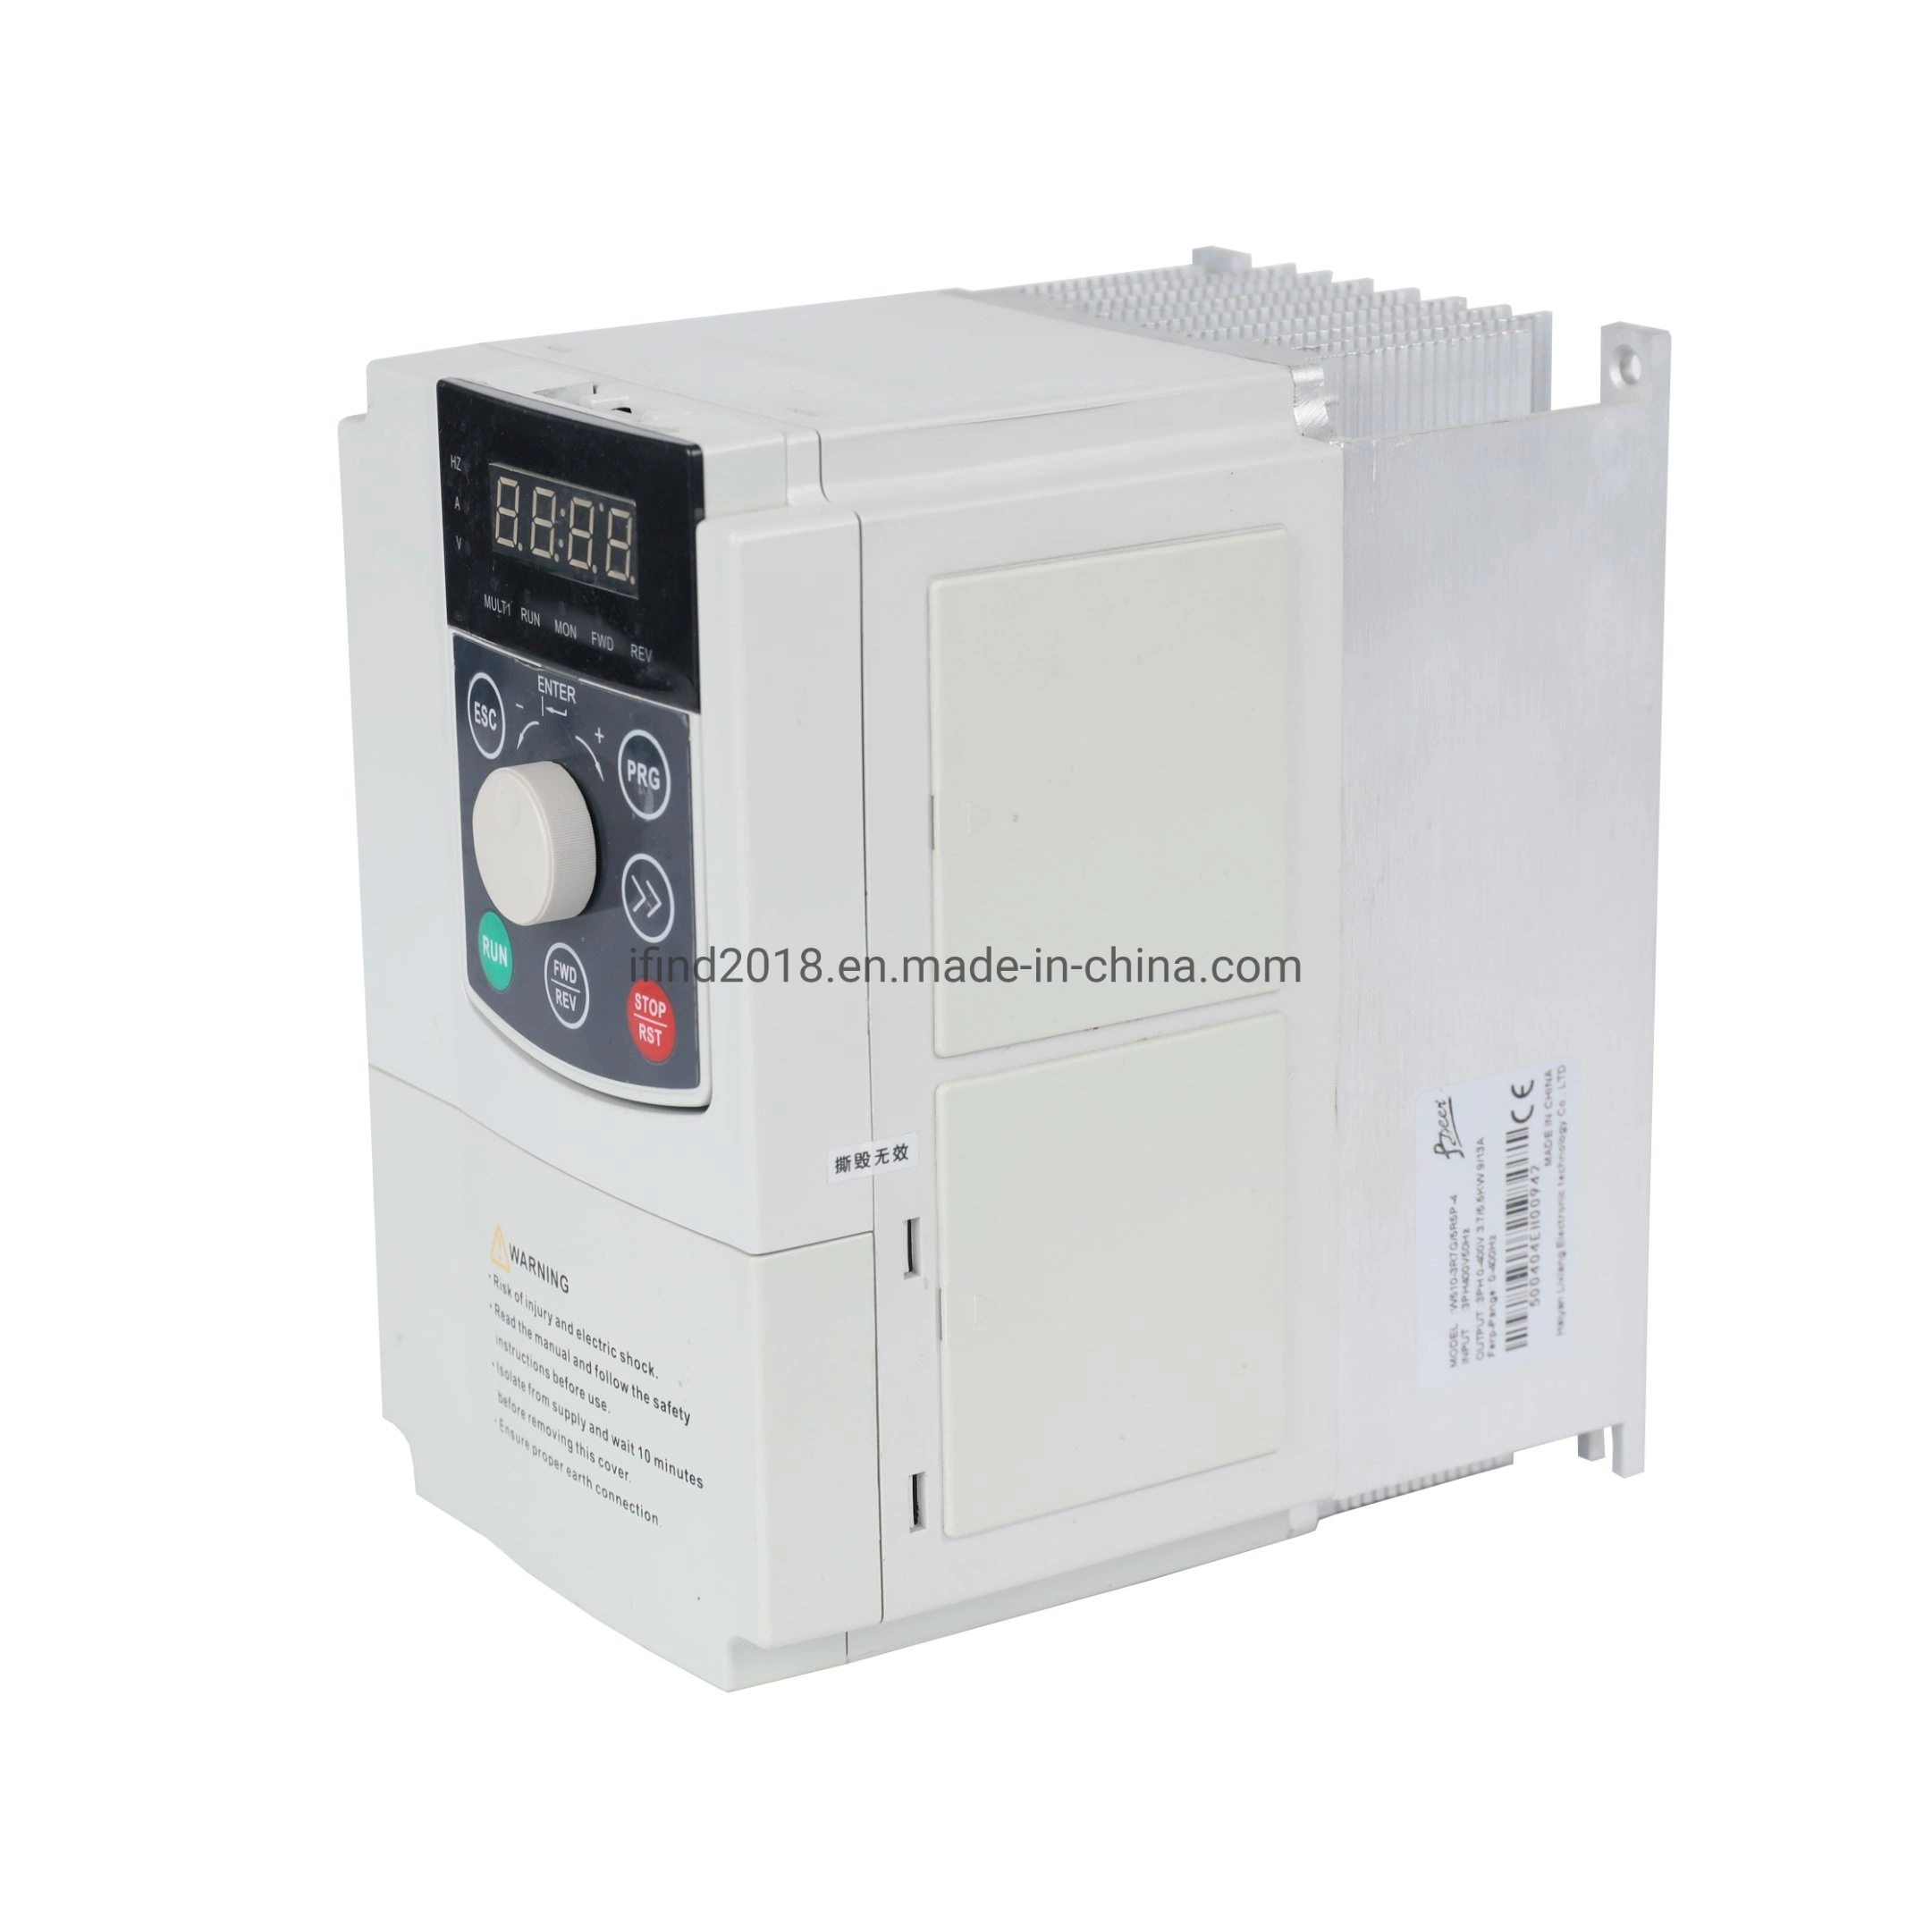 V/F Control VFD Speed Controller Inversor Onduleur Frequency Inverter Variable Frequency Drive